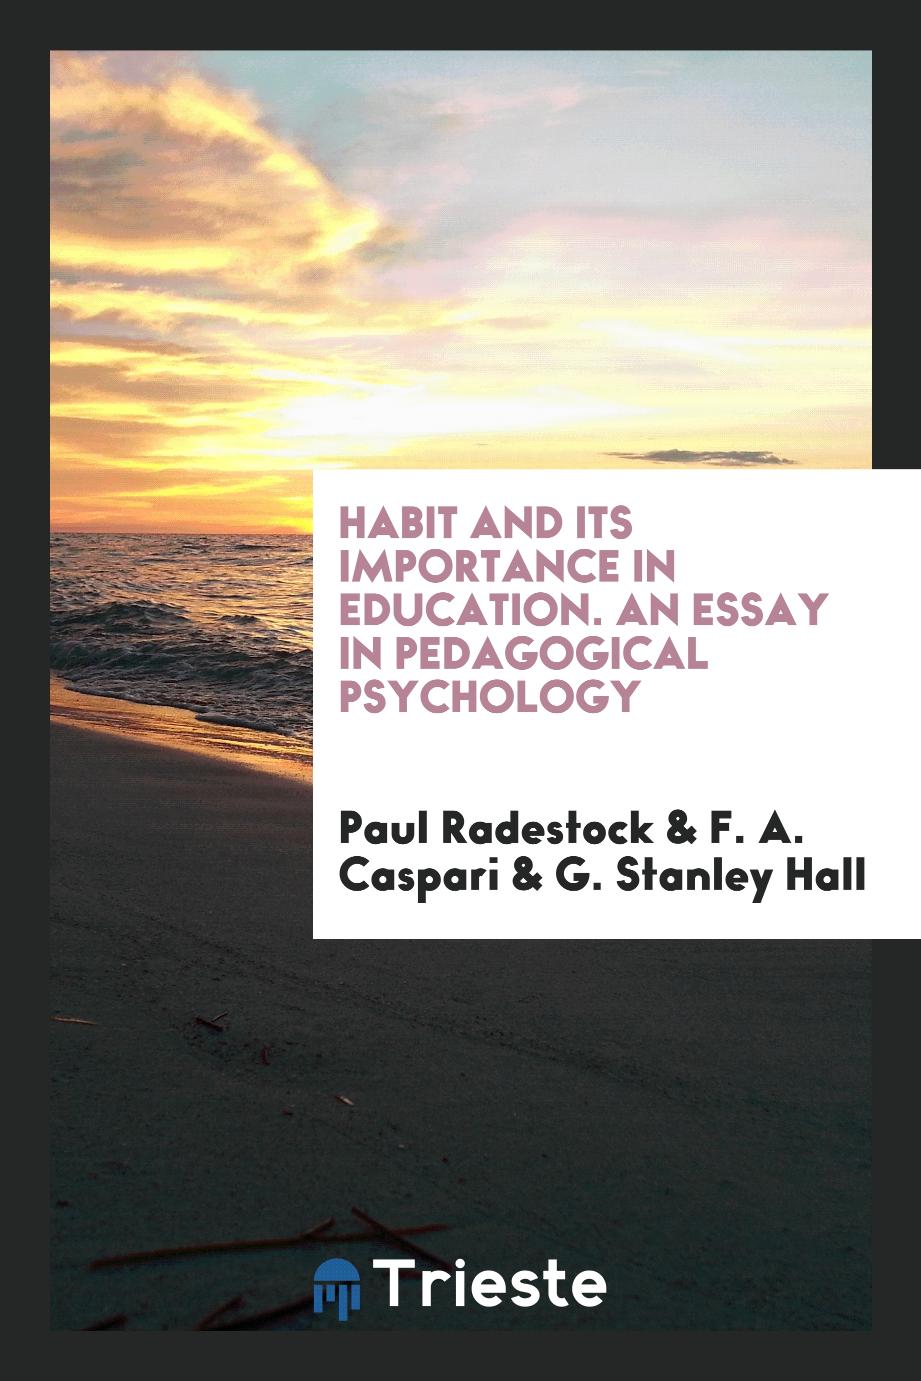 Habit and Its Importance in Education. An Essay in Pedagogical Psychology